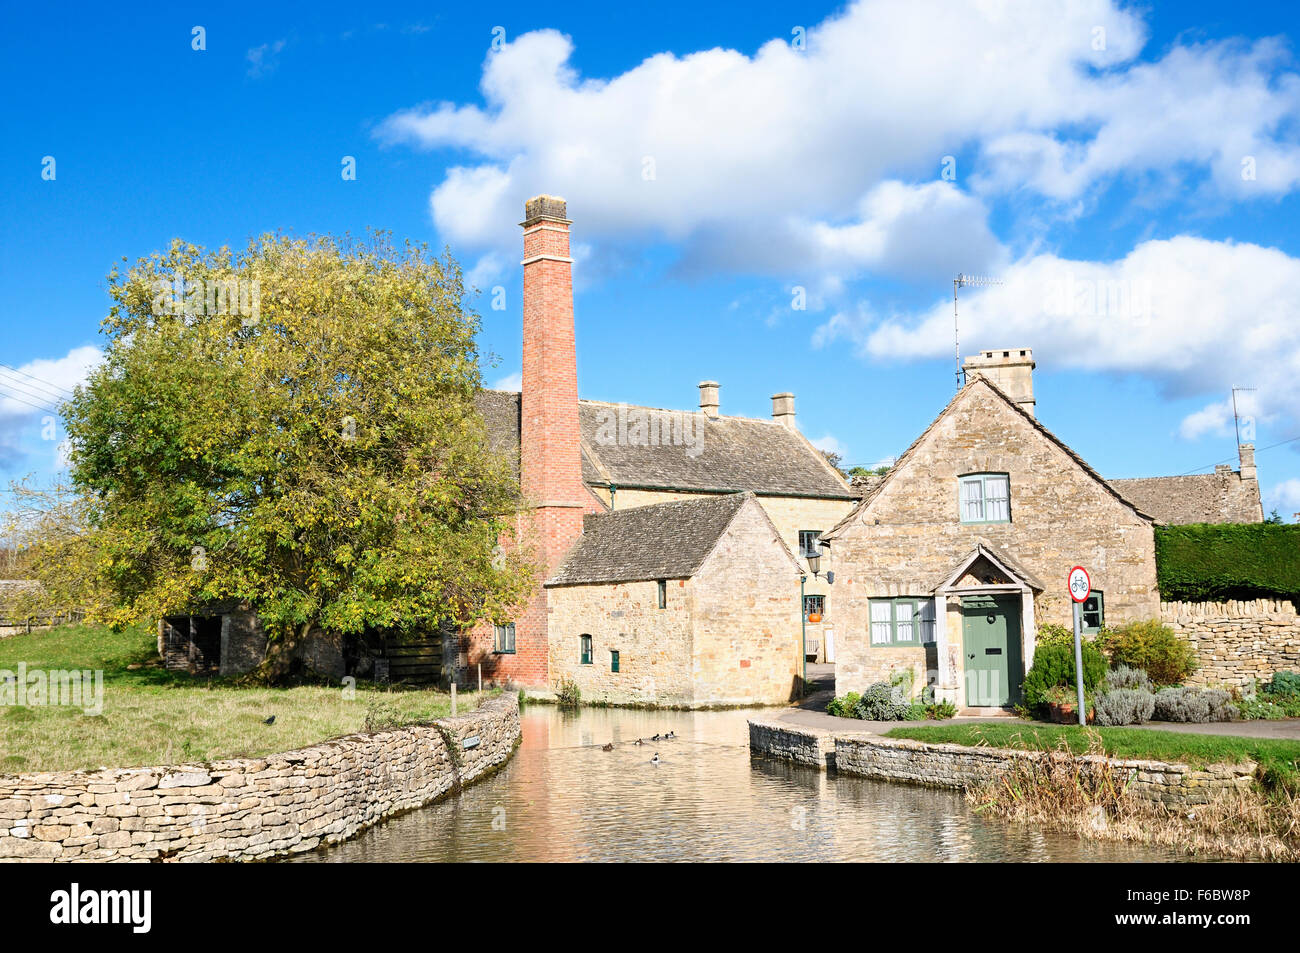 The Old Mill in Lower Slaughter, Cotswolds, Gloucestershire, England, UK Stock Photo